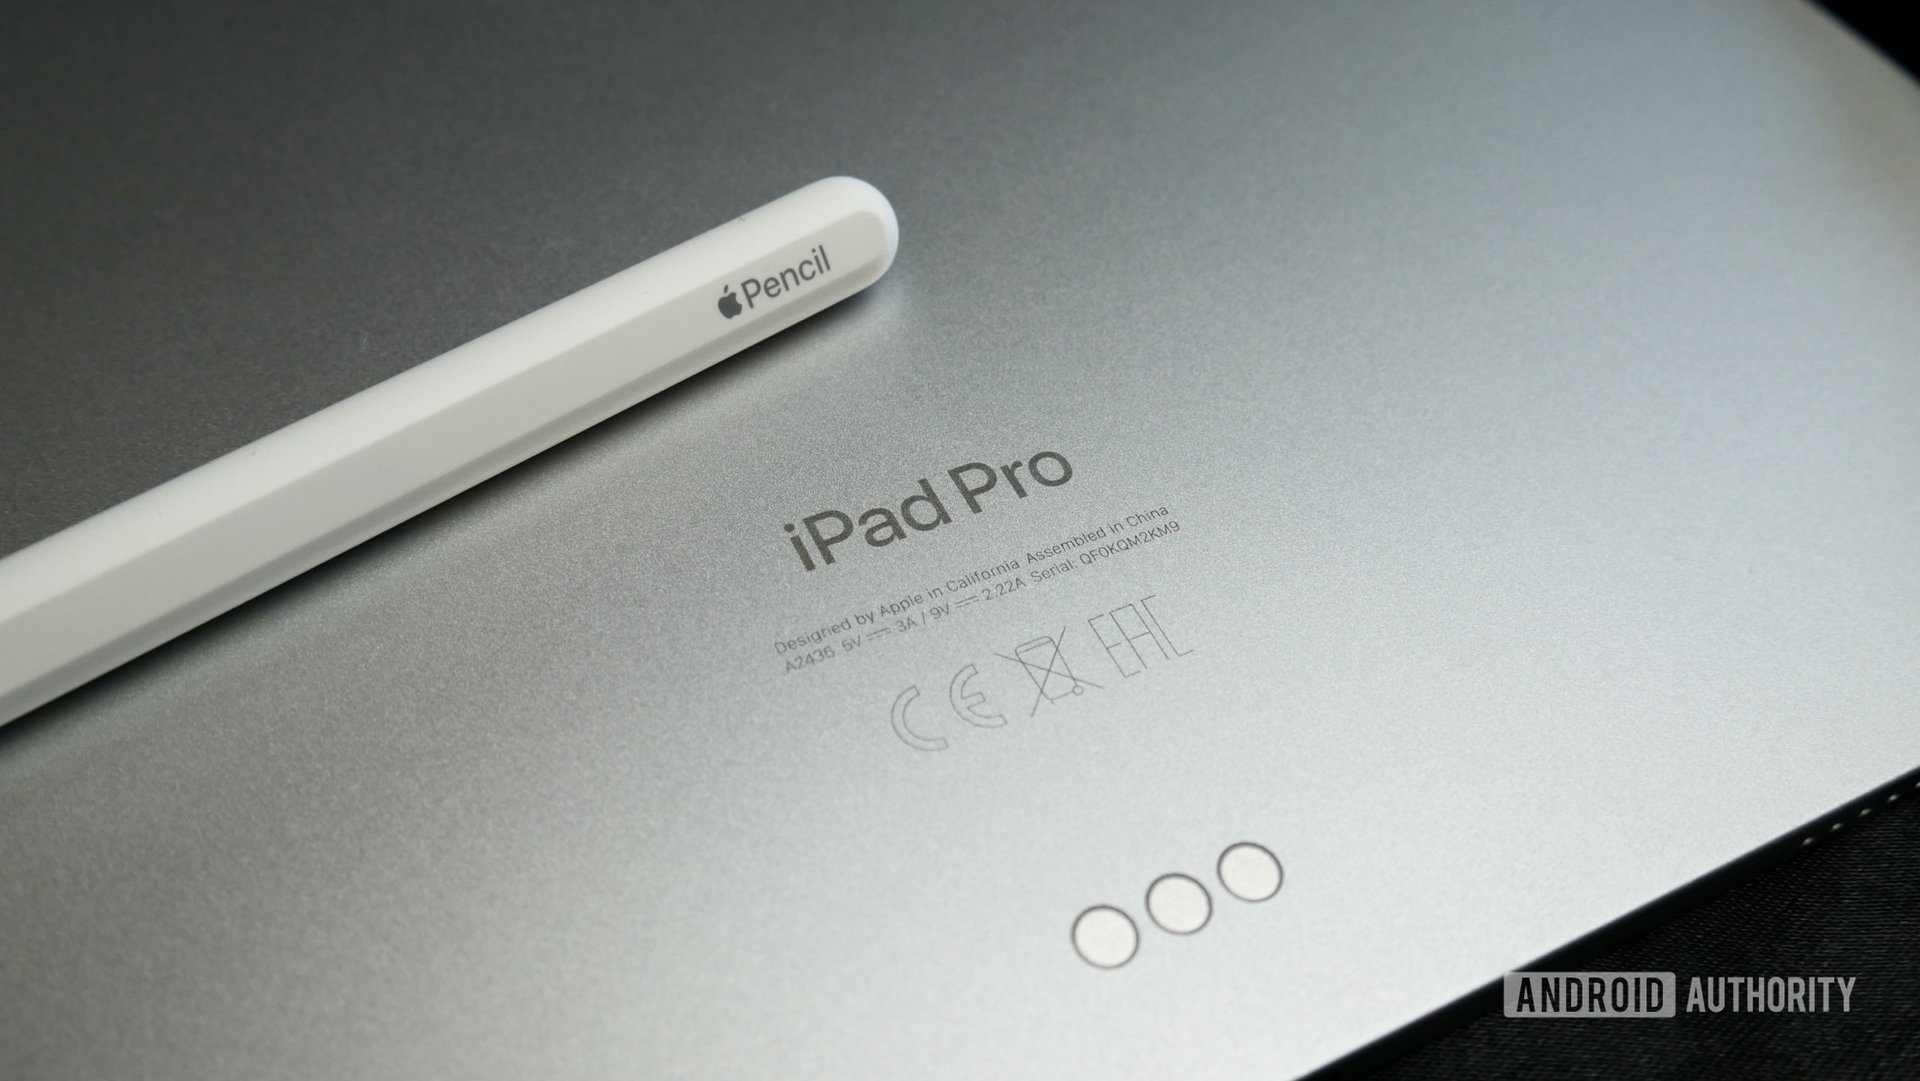 Apple next iPad Pro could bring M3 chip, OLED panels, and new keyboard